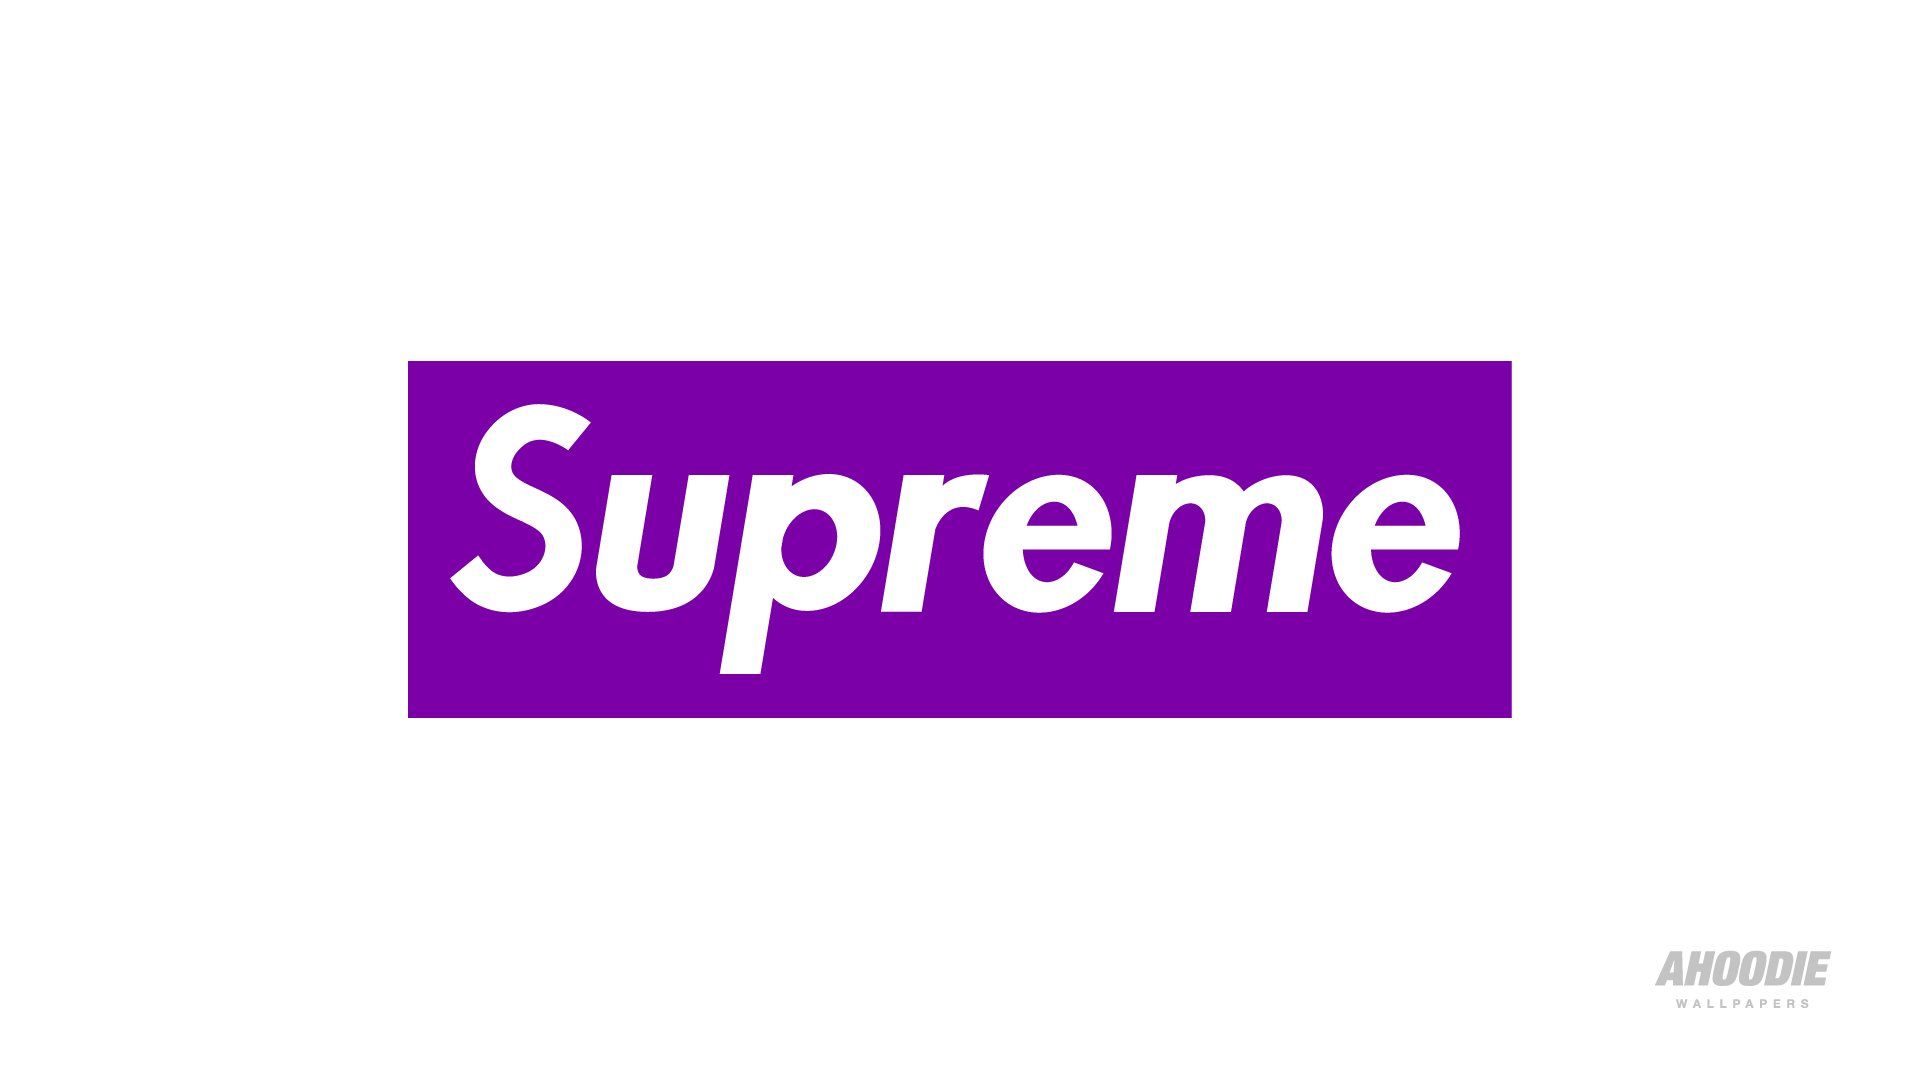 Supreme Laptop Wallpaper: HD, 4K, 5K for PC and Mobile